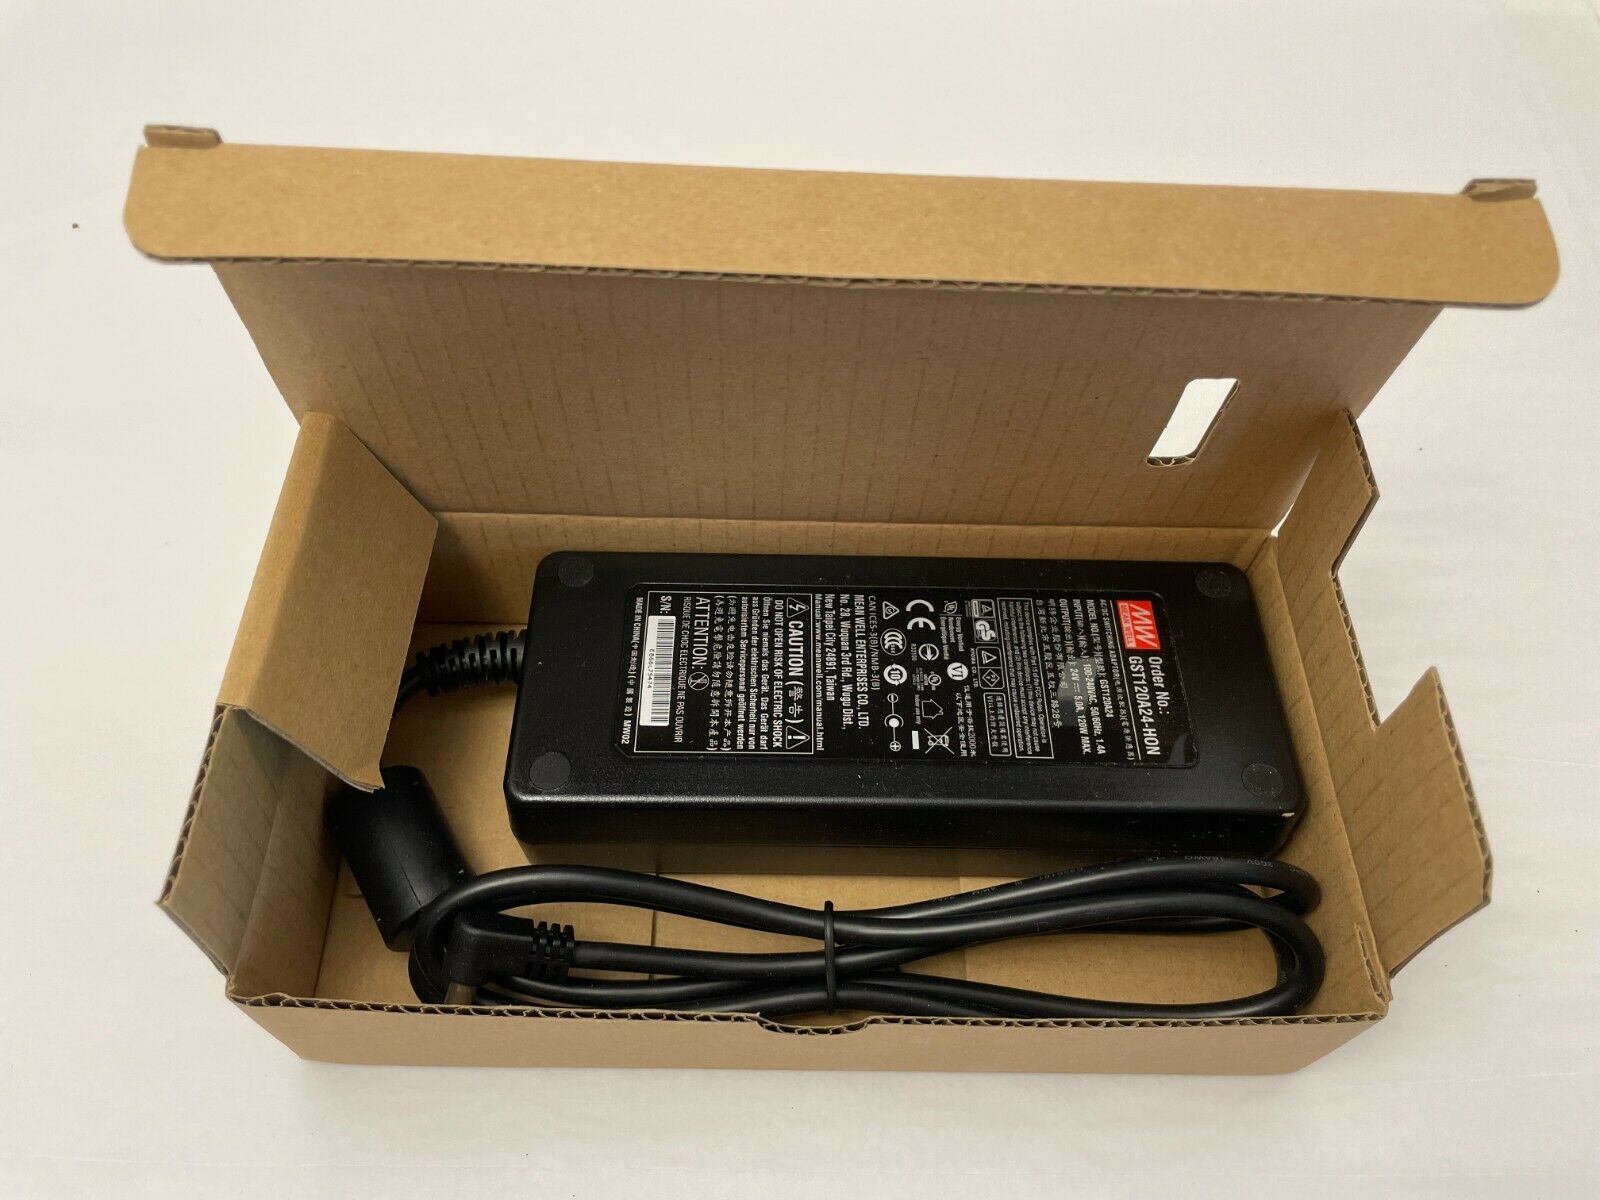 *Brand NEW*MEAN WELL GST120A24-HON Power Supply AC/DC, L6, 24V, 120W, 5 Amp New in Box Country/Region of Man